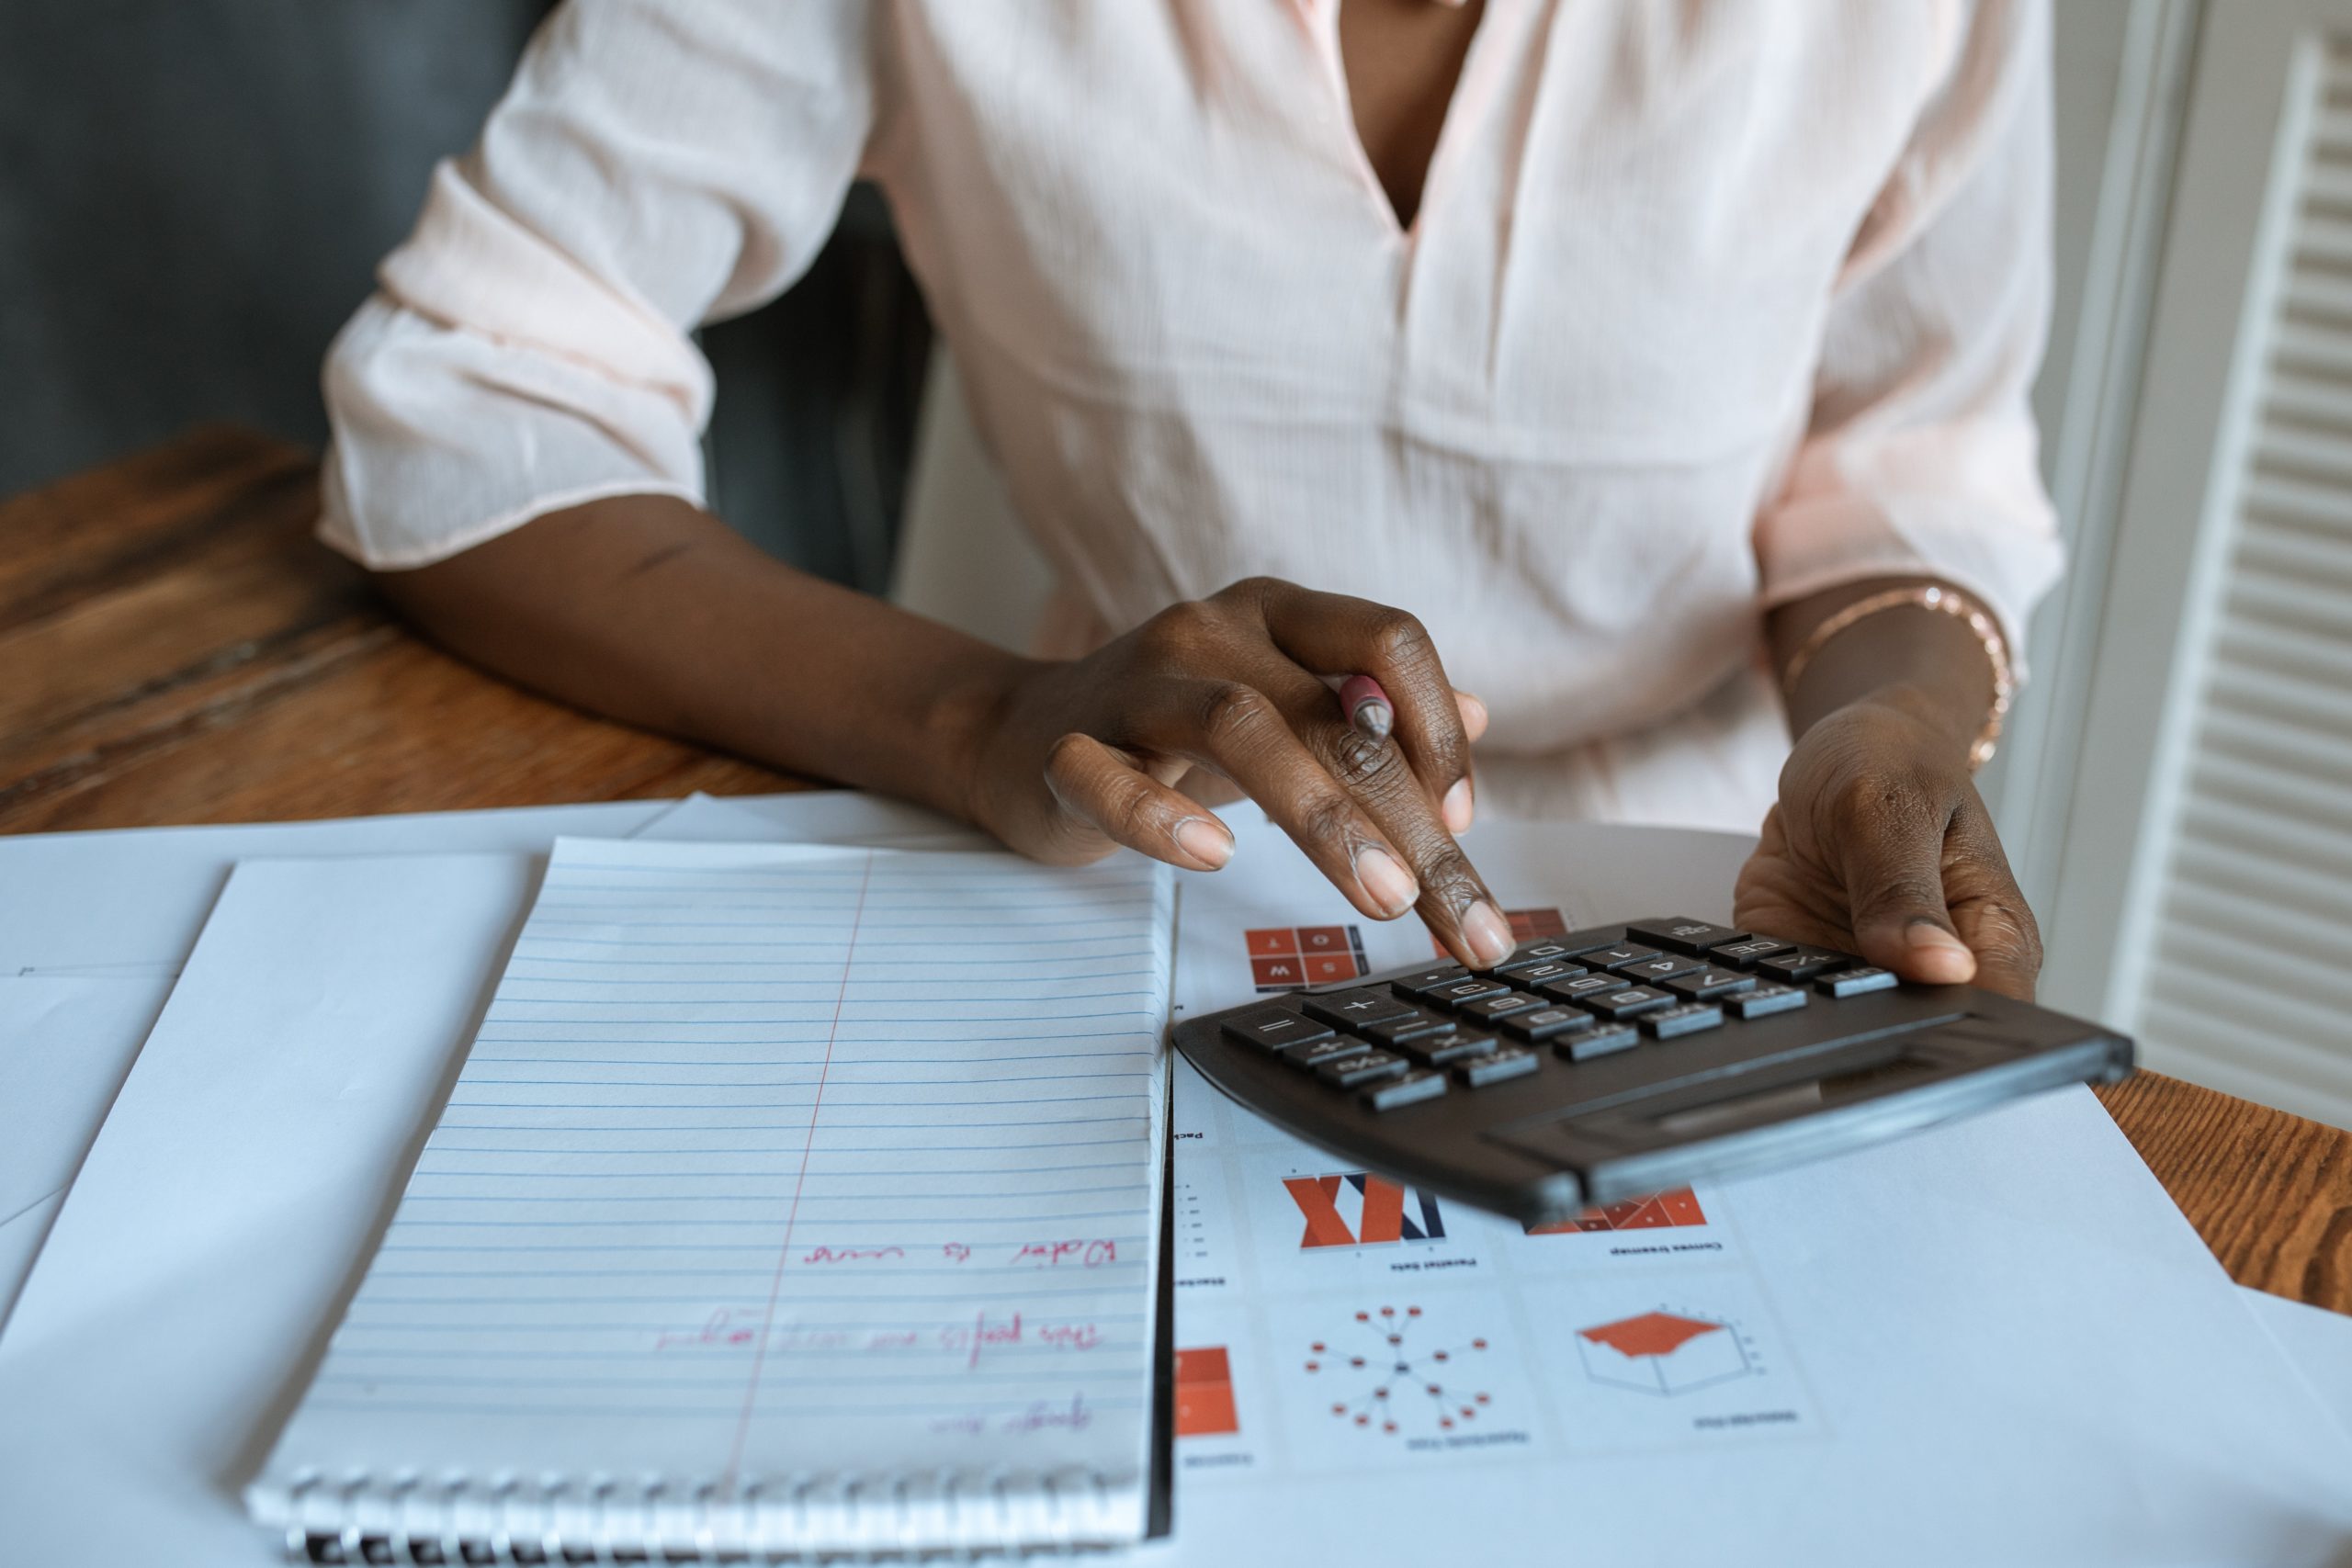 Woman using a calculator to figure numbers on documents